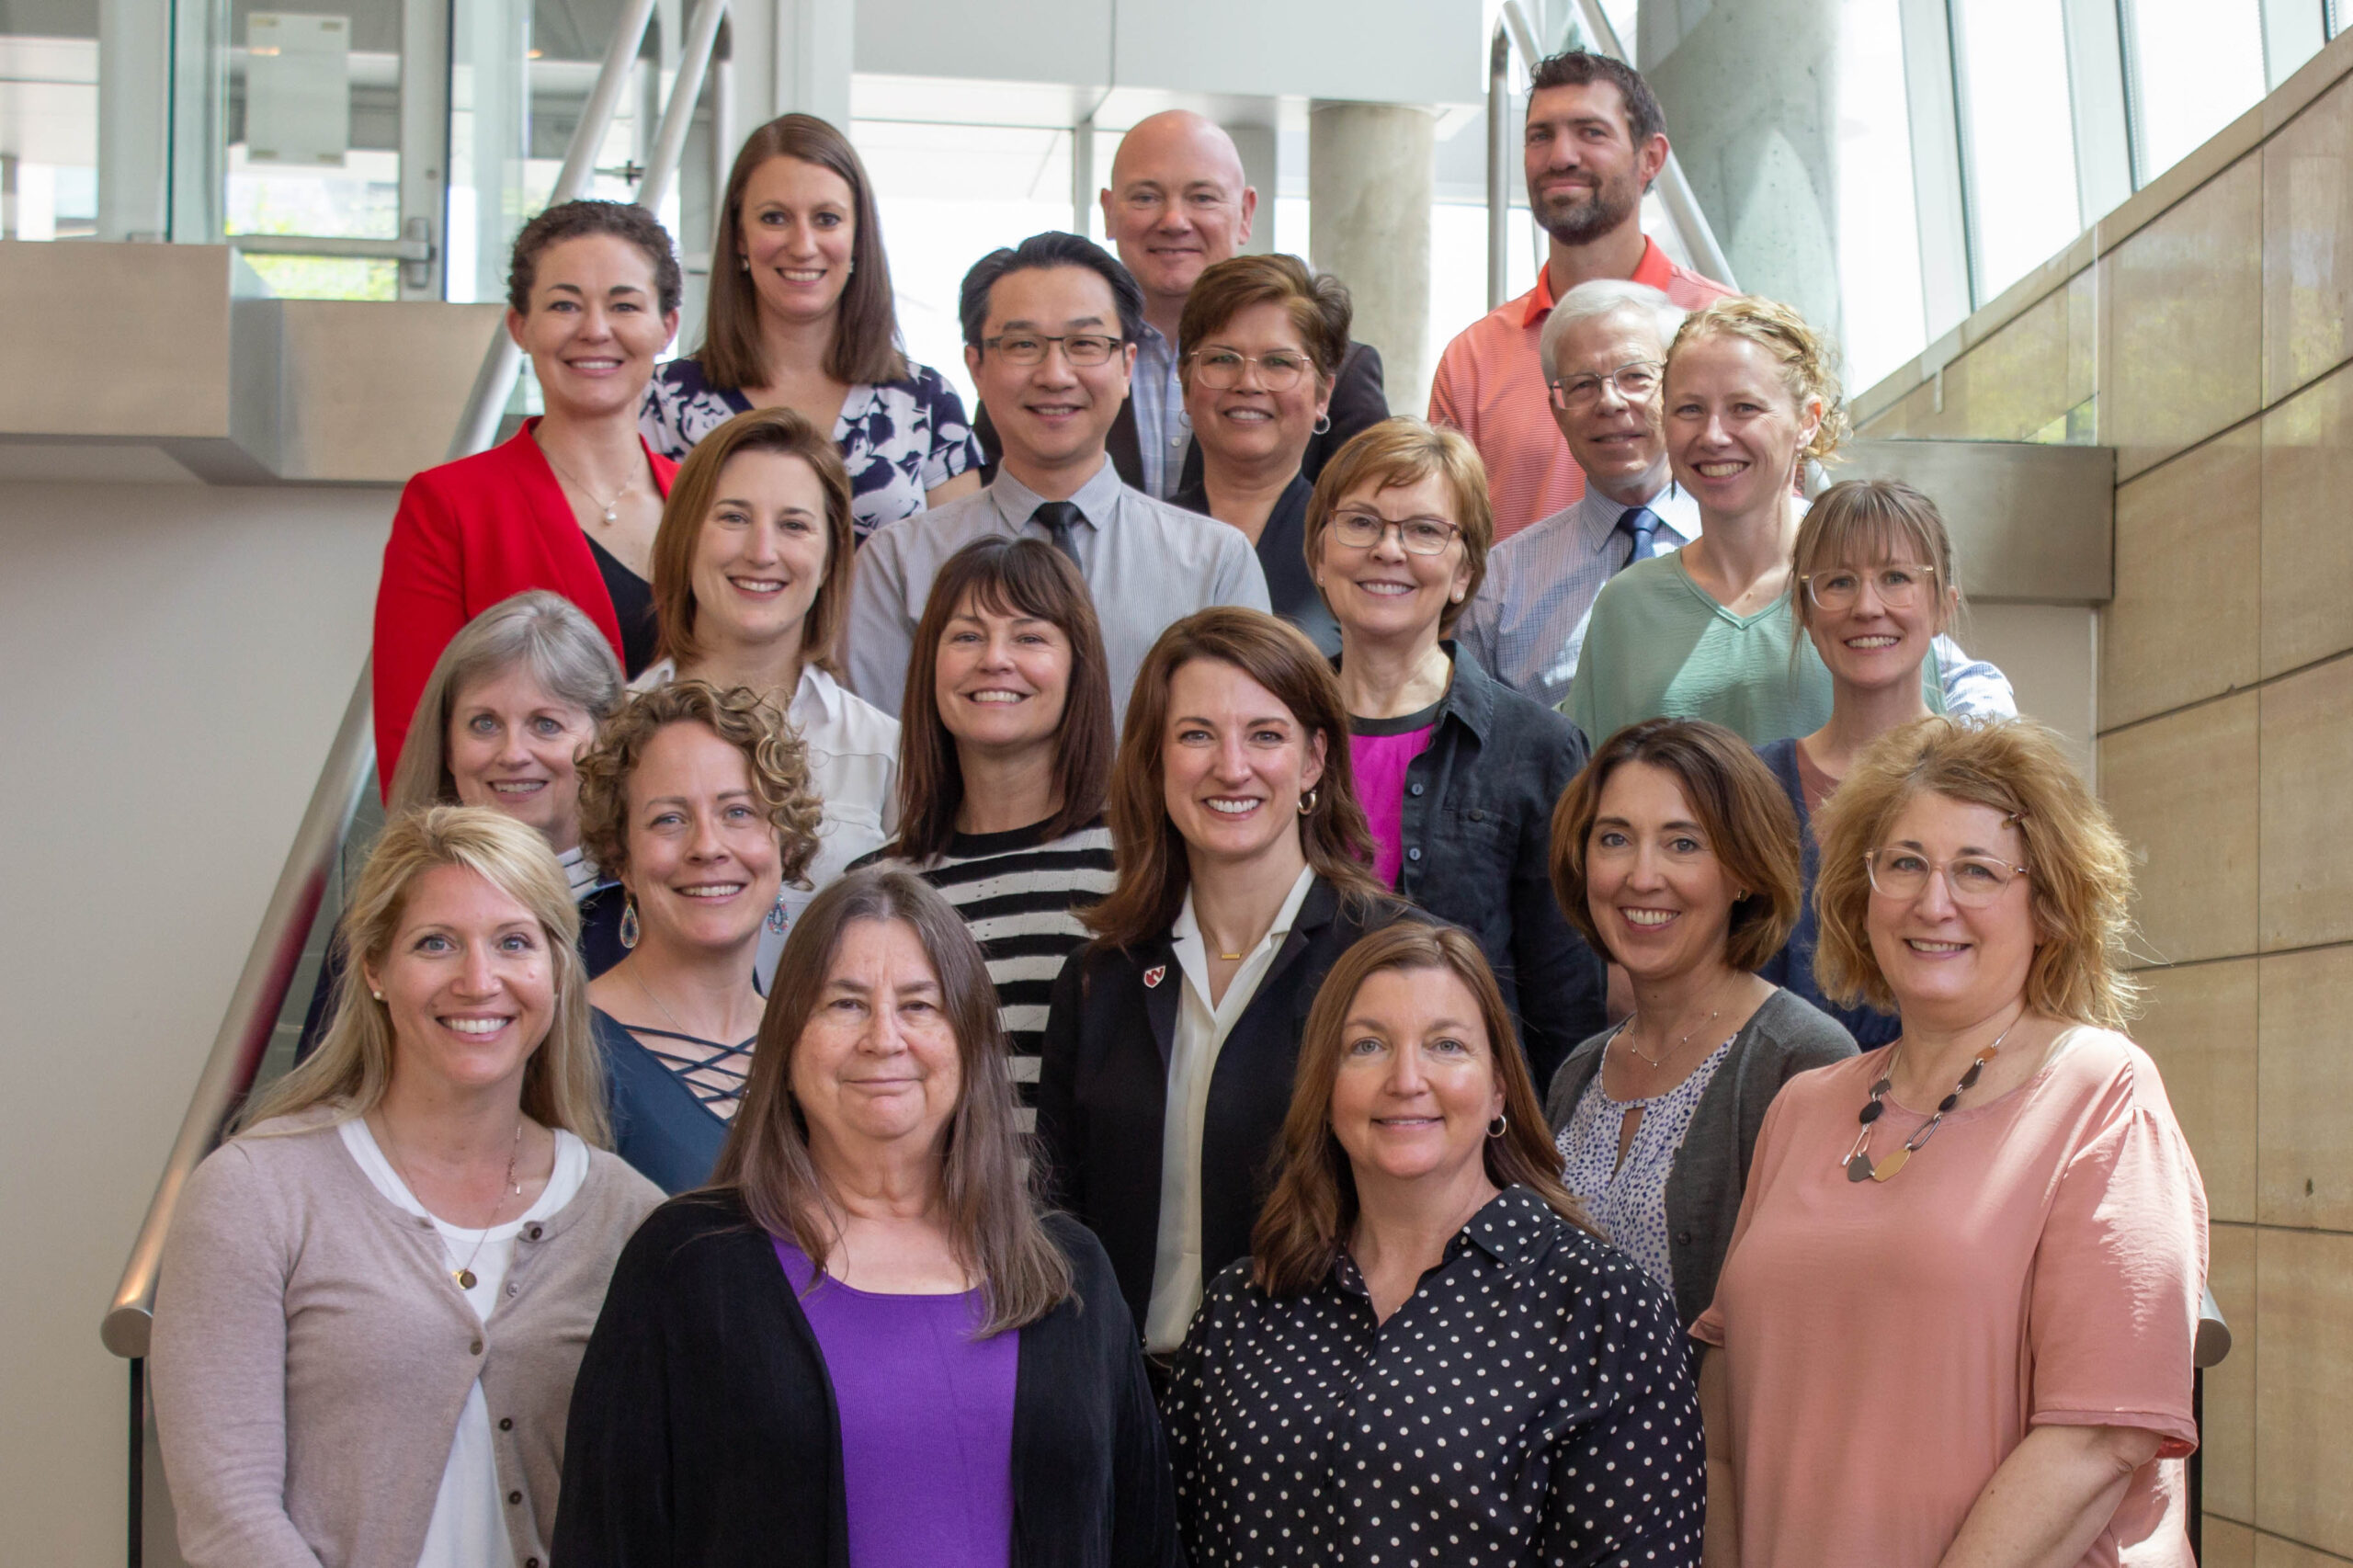 Faculty and staff of the UNMC College of Allied Health Professions&apos; physical therapy program&colon; From left&comma; first row is staff&comma; Marcela Williams&comma; Mary Wood&comma; Megan Krenzer&comma; Michelle Hawkins&period; Faculty are&comma; second row&comma; Tessa Wells&comma; DPT&comma; Betsy Becker&comma; DPT&comma; PhD&comma; Dawn Venema&comma; PhD&semi; third row&comma; Patricia Hageman&comma; PhD&comma; Nikki Sleddens&comma; PhD&semi; fourth row&comma; Sara Bills&comma; DPT&comma; Kathleen Volkman&comma; MS&comma; Kellie Gossman&comma; DPT&semi; fifth row&comma; Megan Frazee&comma; DPT&comma; Ka-Chun &lpar;Joseph&rpar; Siu&comma; PhD&comma; Grace Johnson&comma; DPT&comma; Joseph Norman&comma; PhD &lpar;retired&rpar;&comma; Elizabeth Wellsandt&comma; DPT&comma; PhD&semi; sixth row&comma; Stacie Christensen&comma; DPT&comma; Mike Rosenthal&comma; DSc&comma; Mike Wellsandt&comma; DPT&period; Not pictured&comma; Laura Bilek&comma; PhD&comma; Teresa Cochran&comma; DPT&comma; Kyle Meyer&comma; PhD&comma; Kaitlyn Uwazurike&comma; DPT&period;